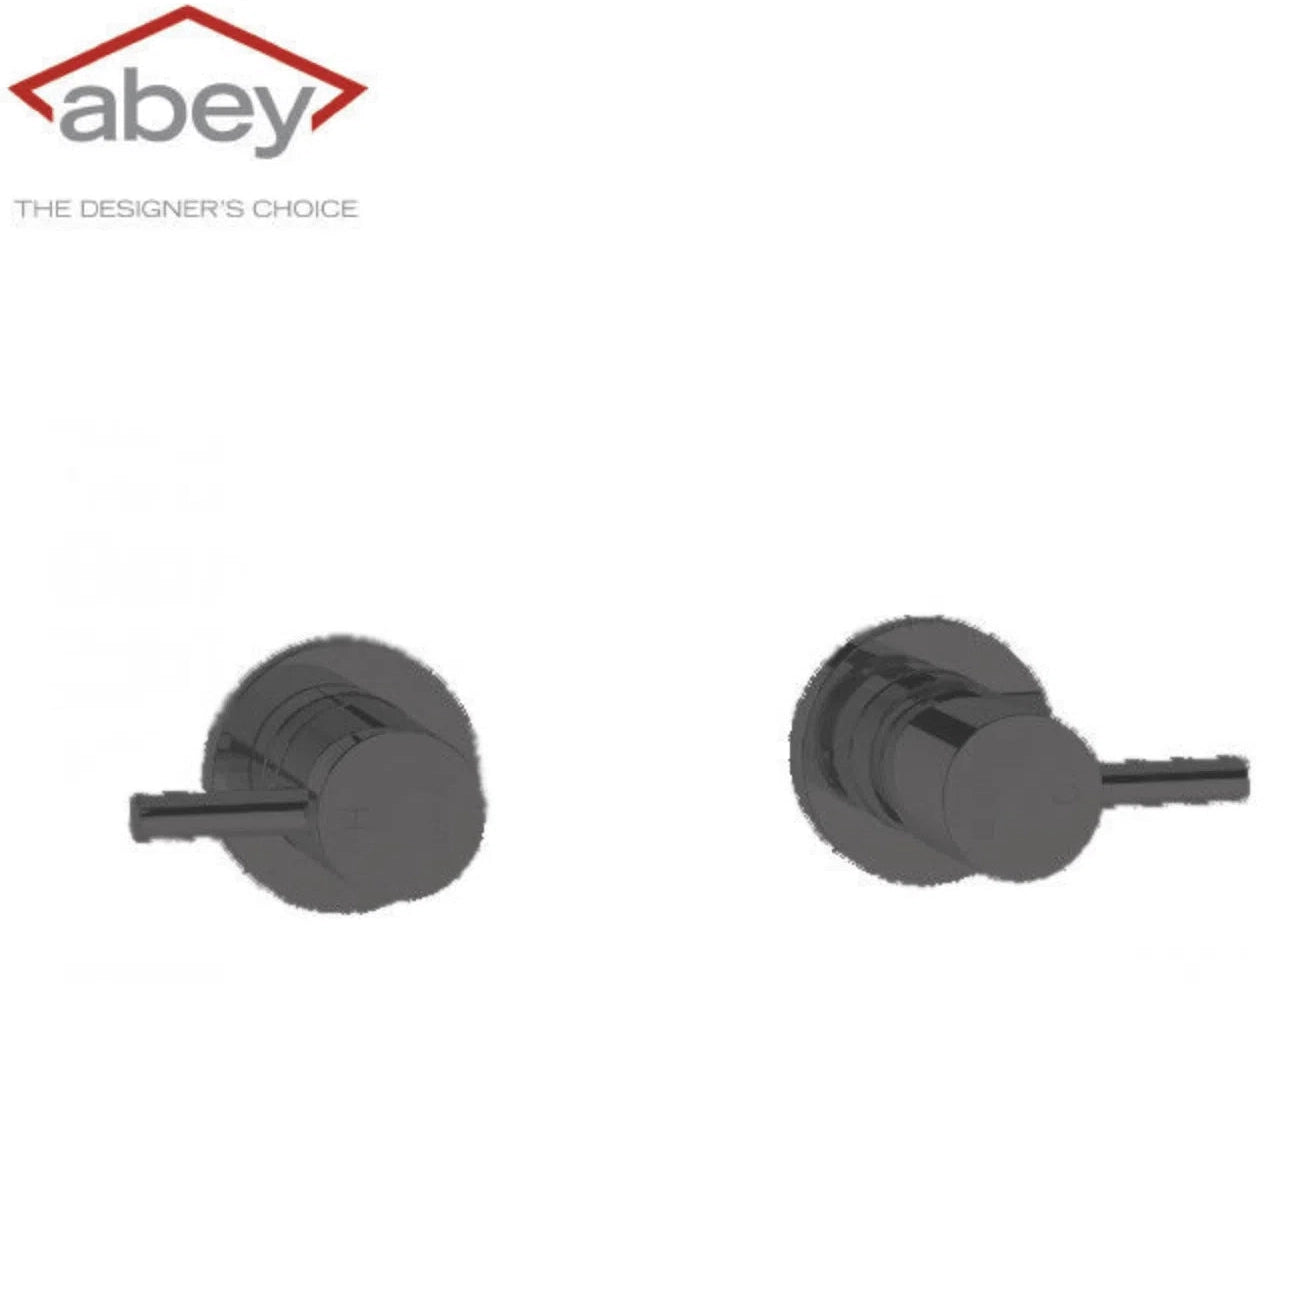 Abey Lucia Wall Top Assembly